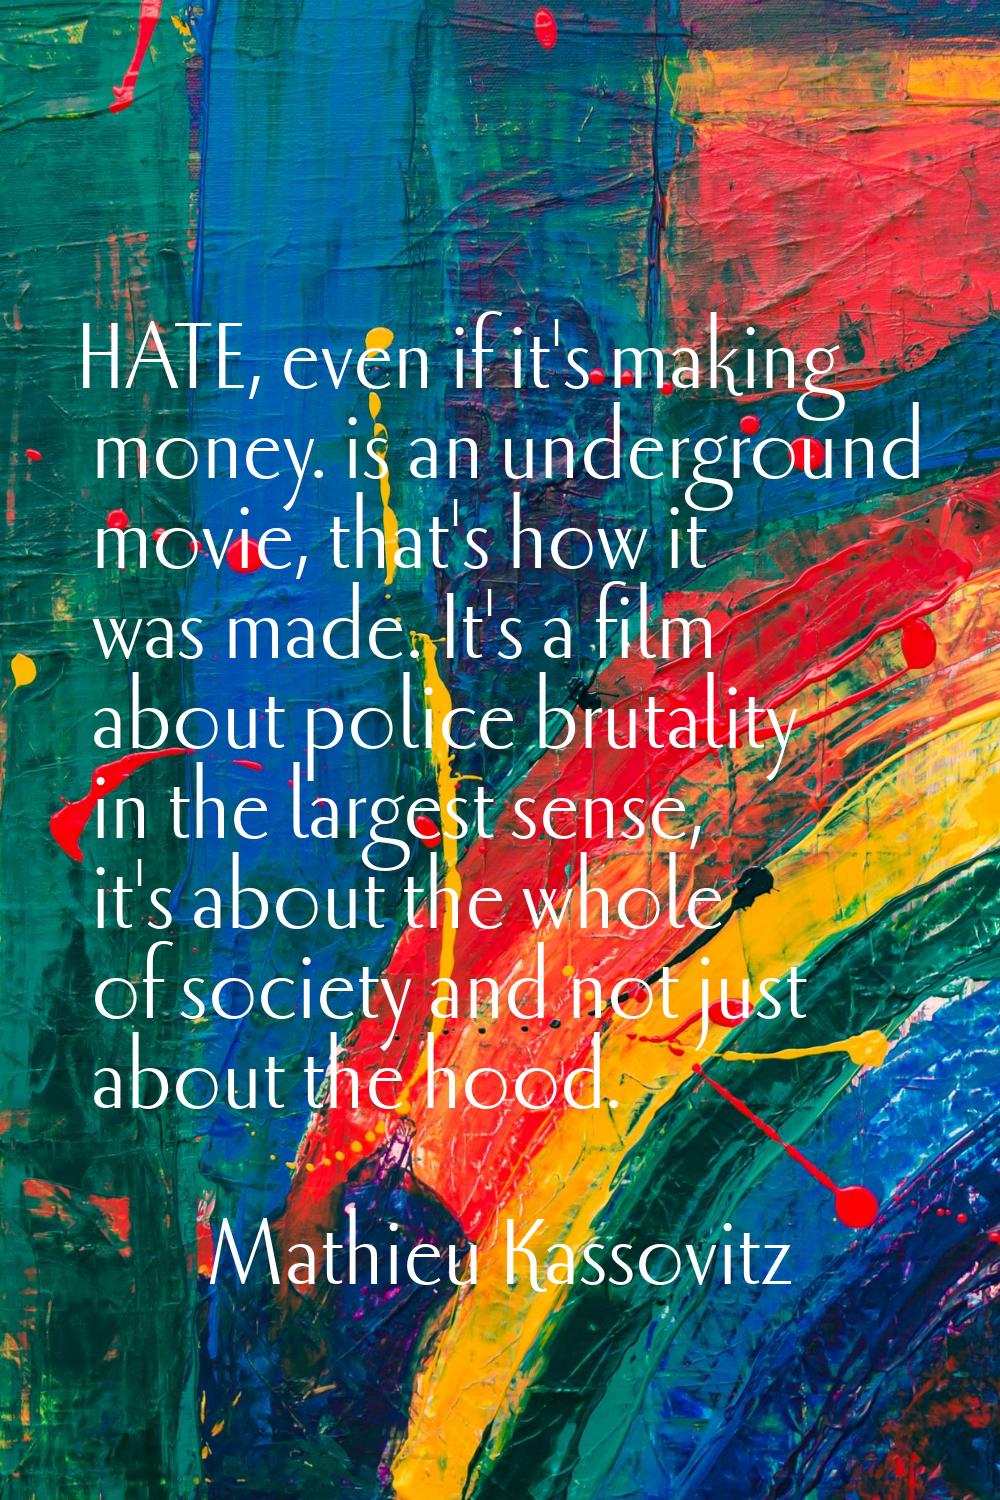 HATE, even if it's making money. is an underground movie, that's how it was made. It's a film about